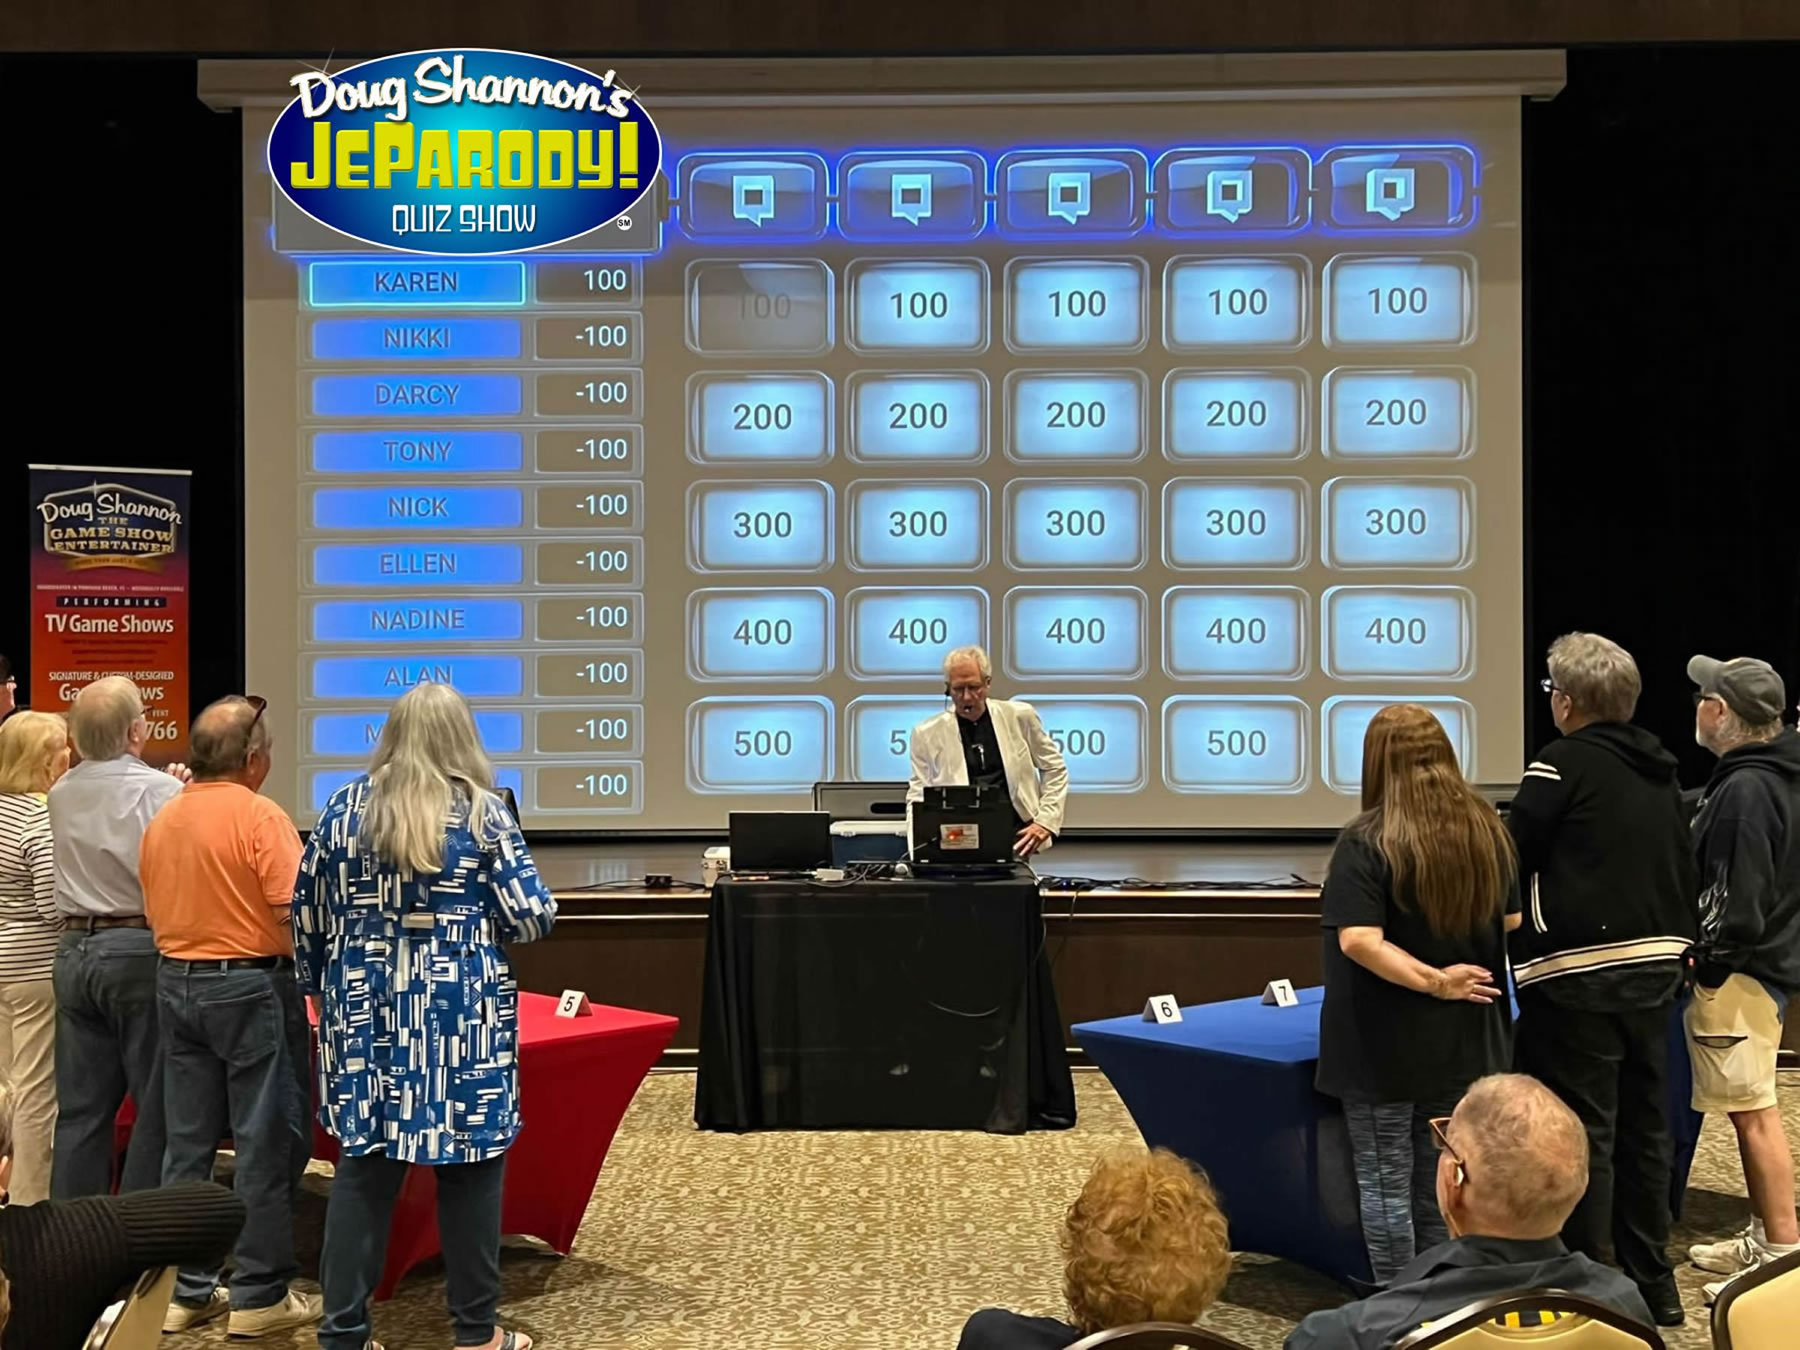 JeParody! Quiz Show Image of game screen and contestants playing the game with Doug hosting the show